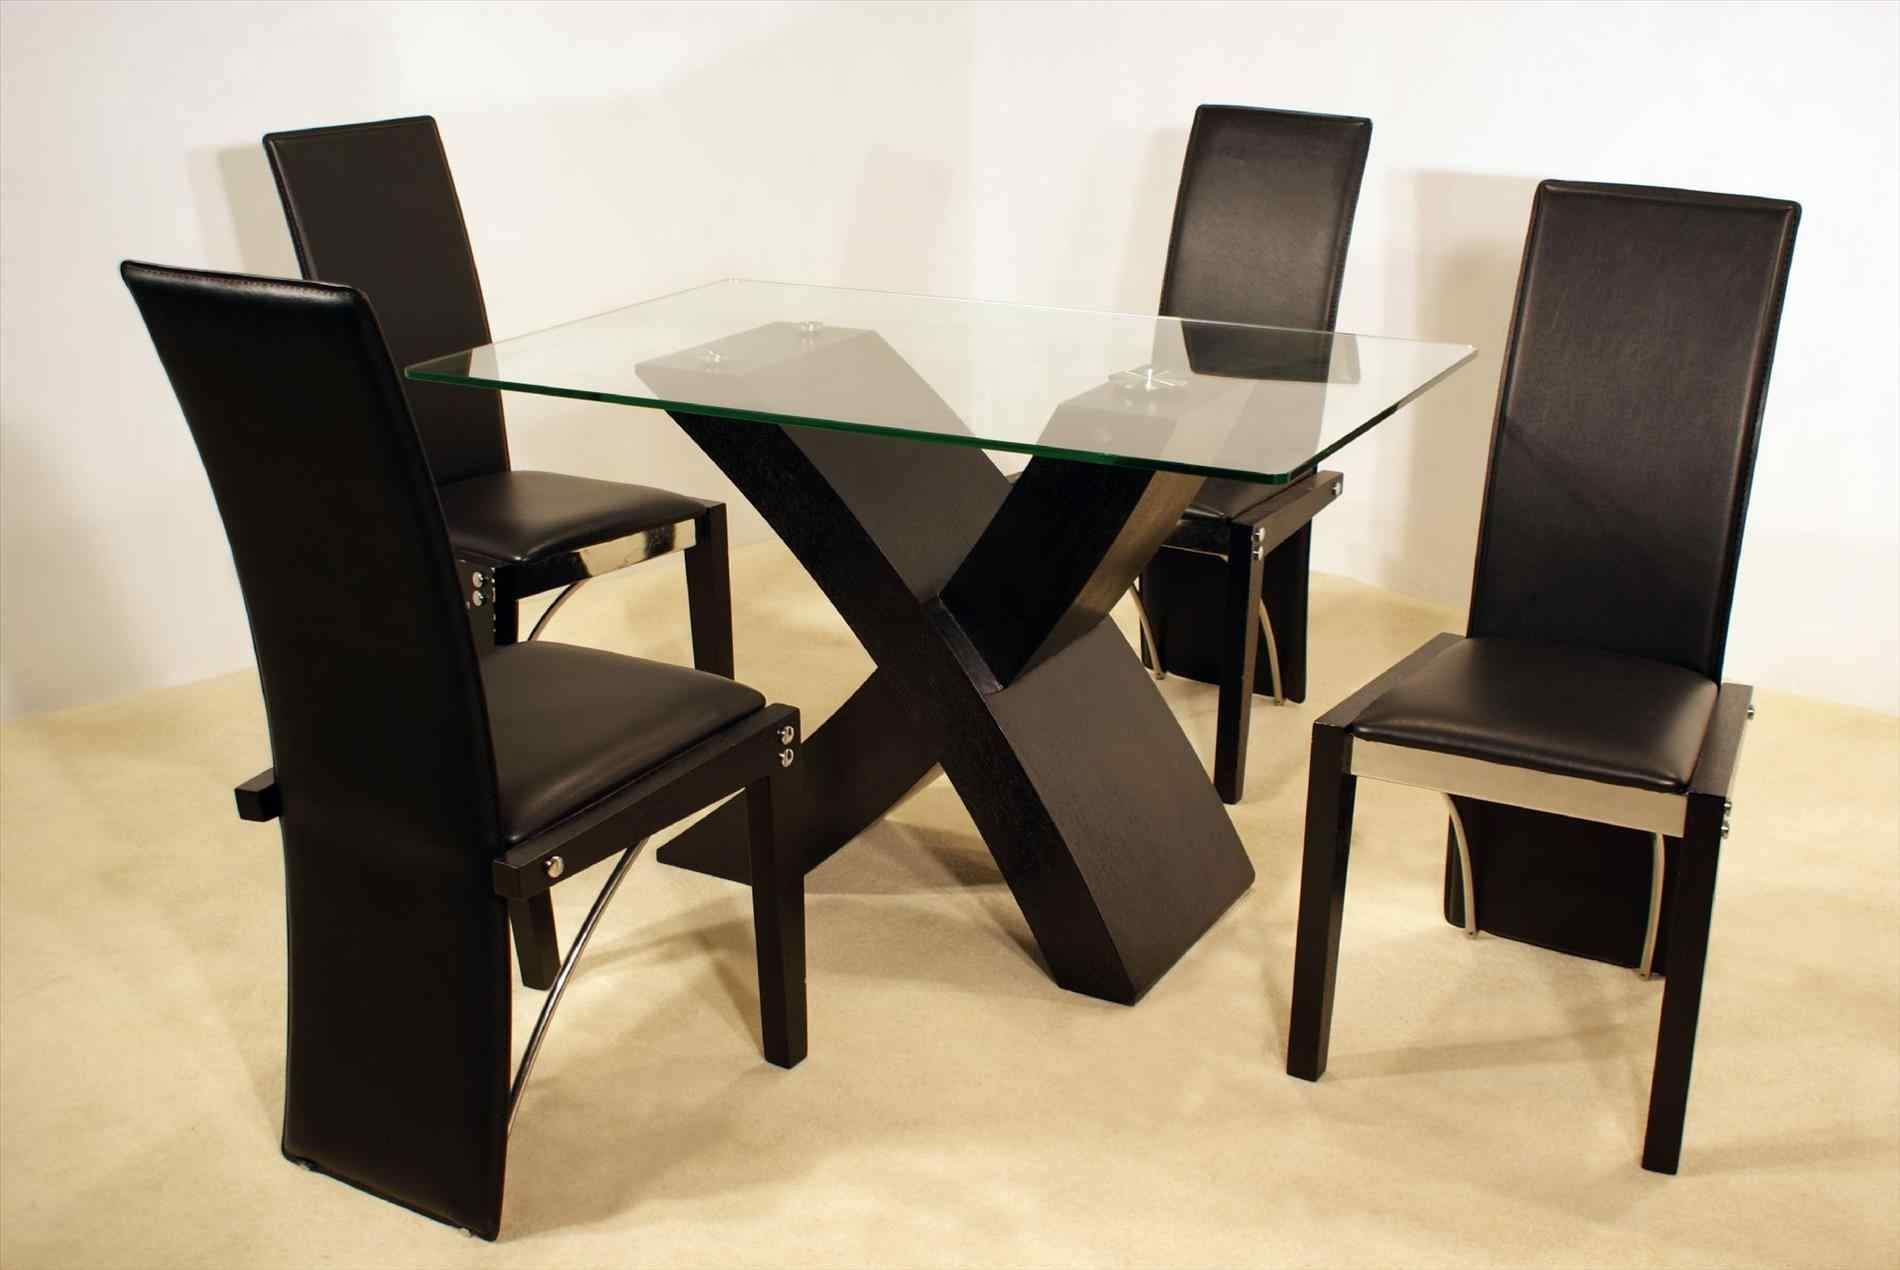 Gorgeous Ideas For 4 Person Dining Room Set Glass Top in measurements 1900 X 1270